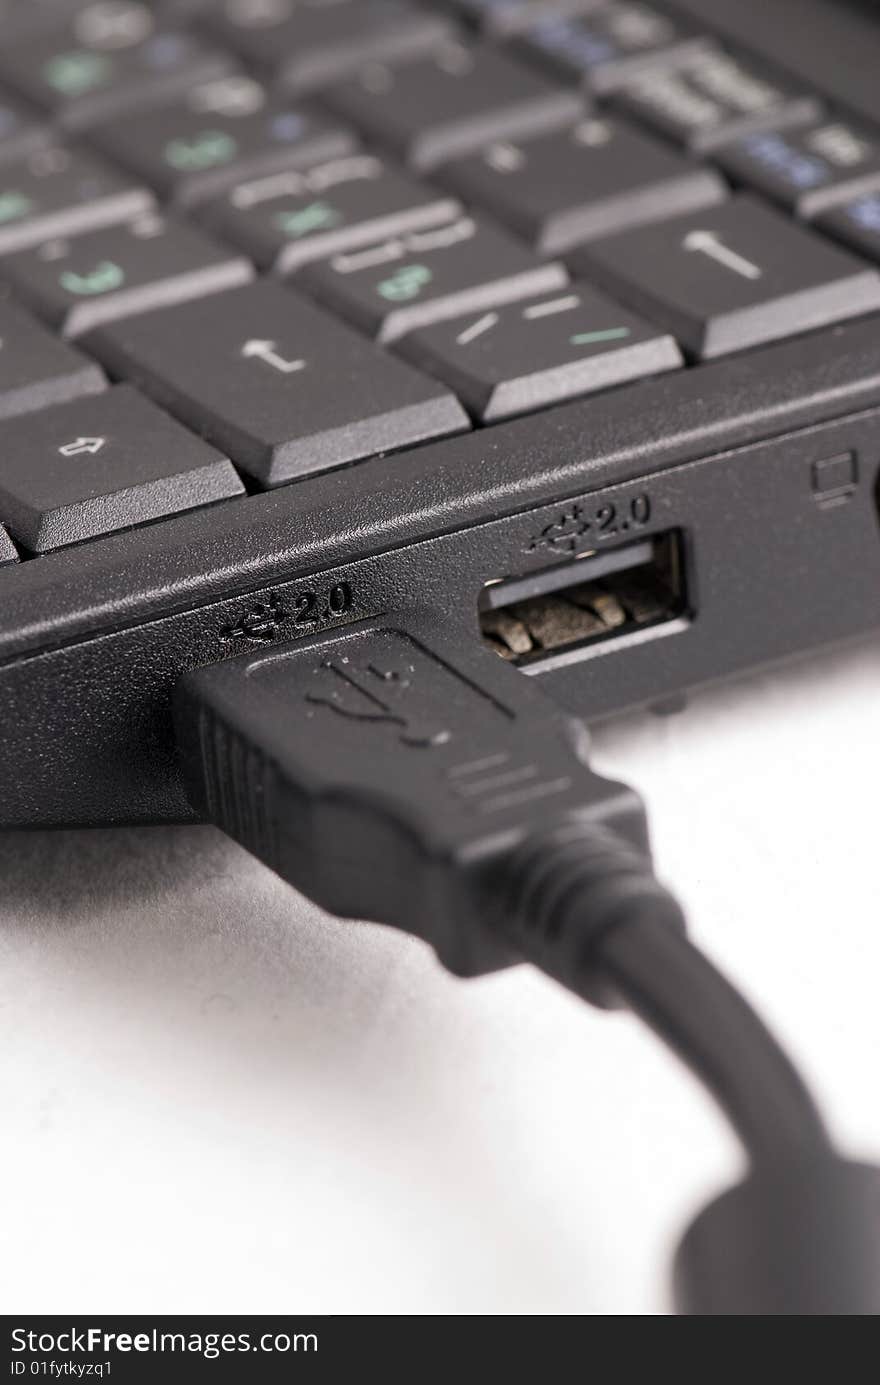 USB cable plugged into a laptop computer. USB cable plugged into a laptop computer